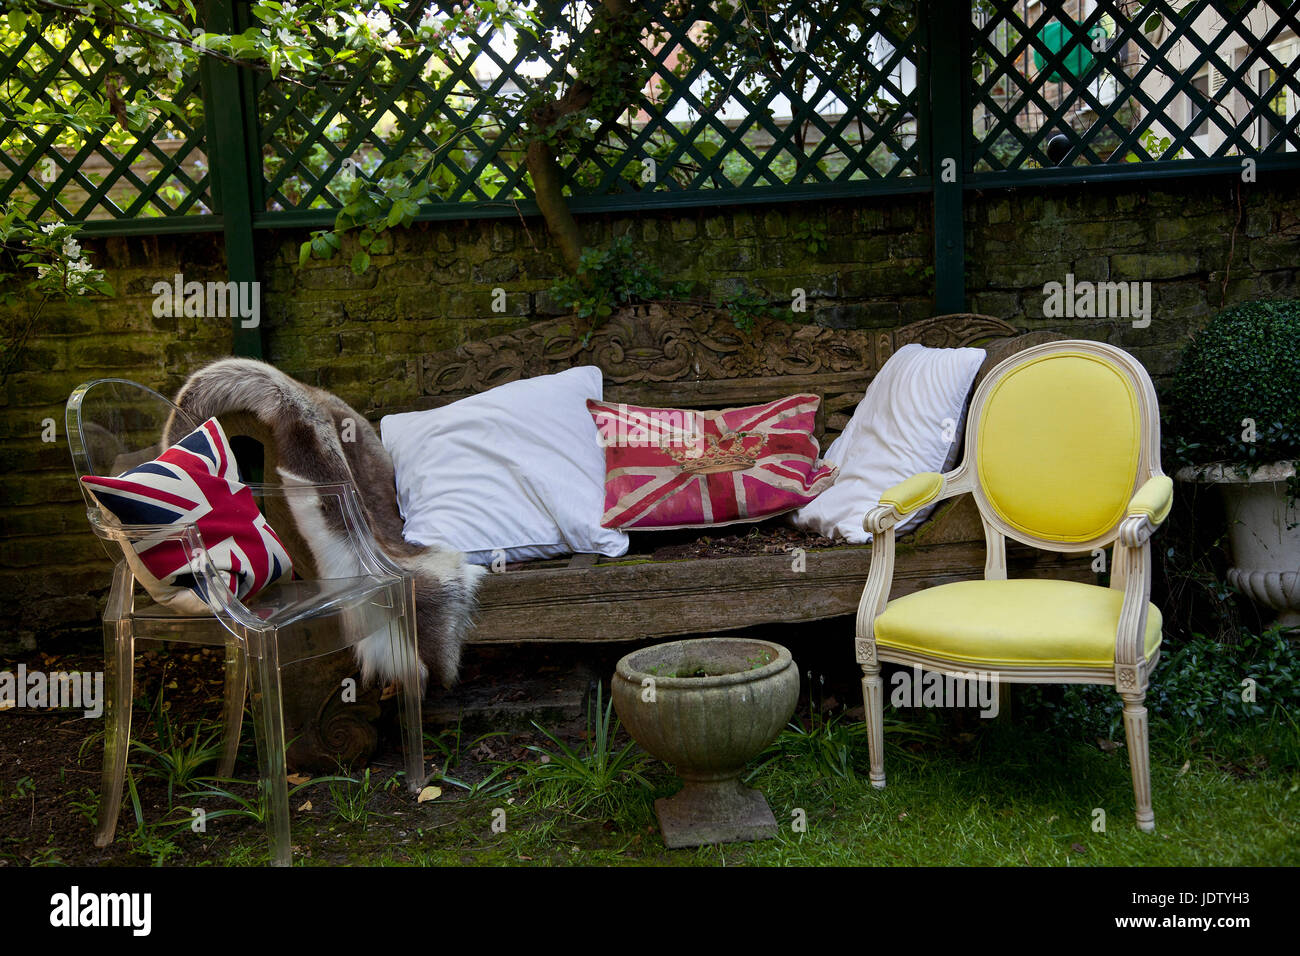 Pillows on sofa and chairs in backyard Stock Photo